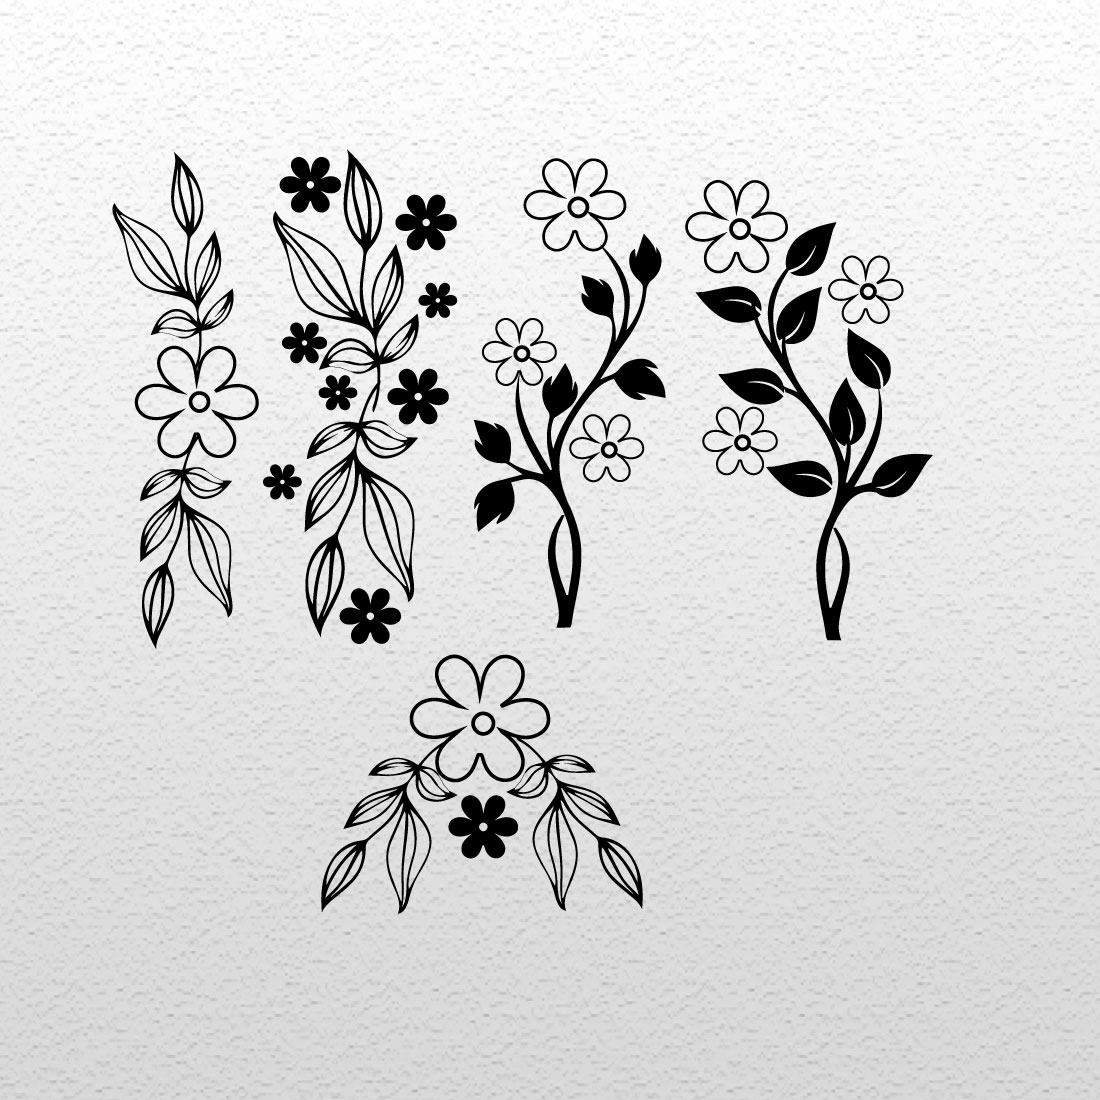 A selection of gorgeous flower silhouette images